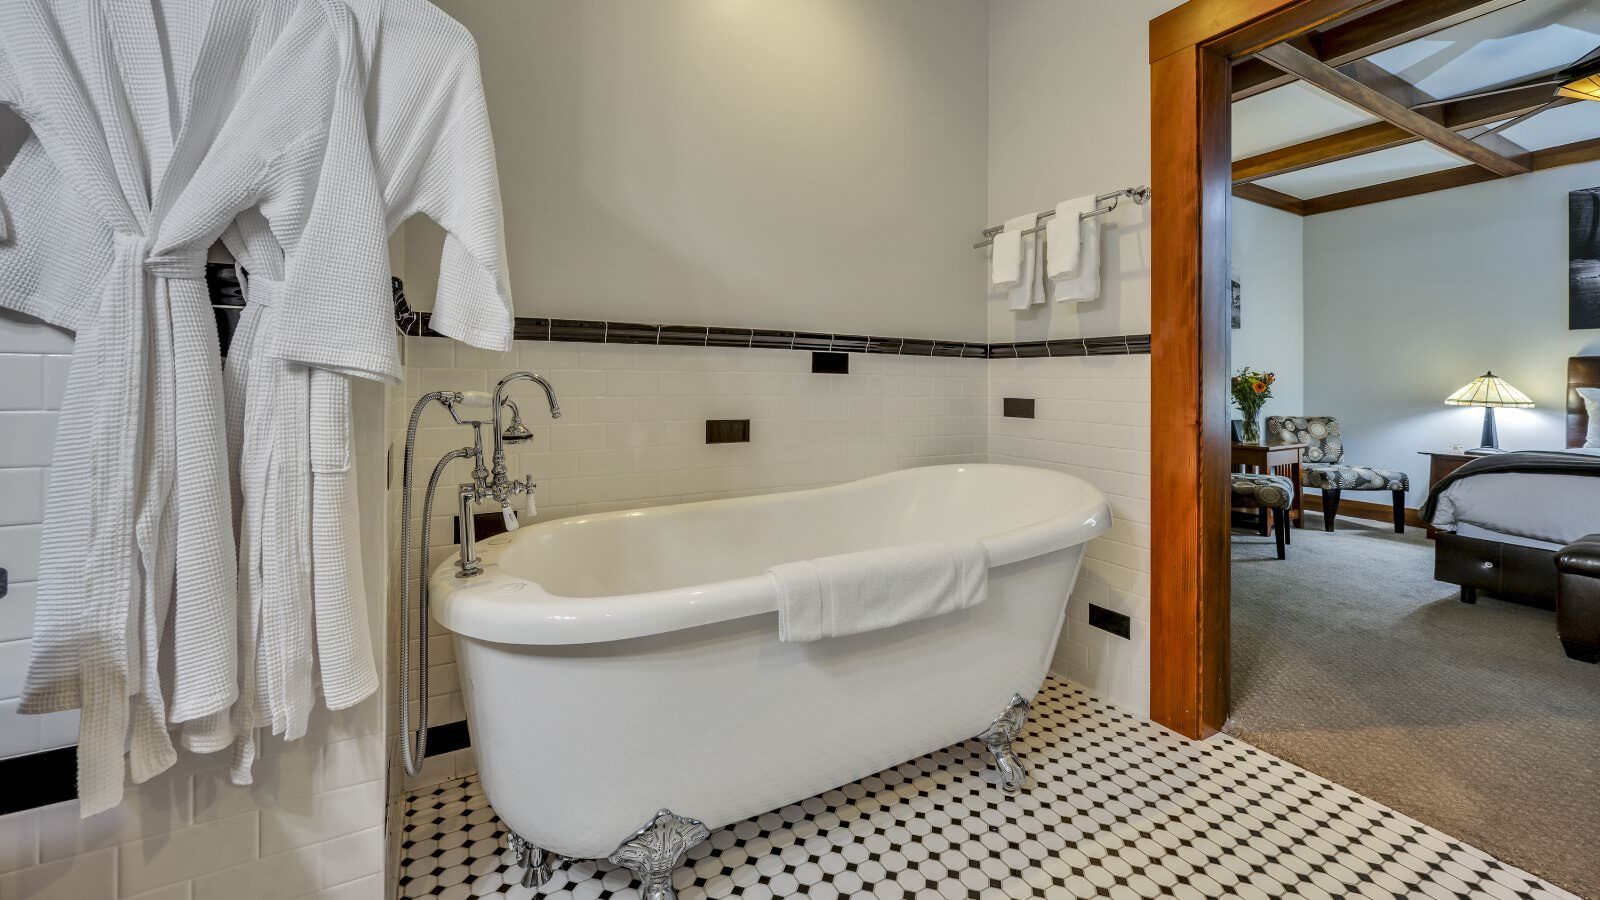 Bathroom with white walls, black and white tiled floor, and white clawfoot tub